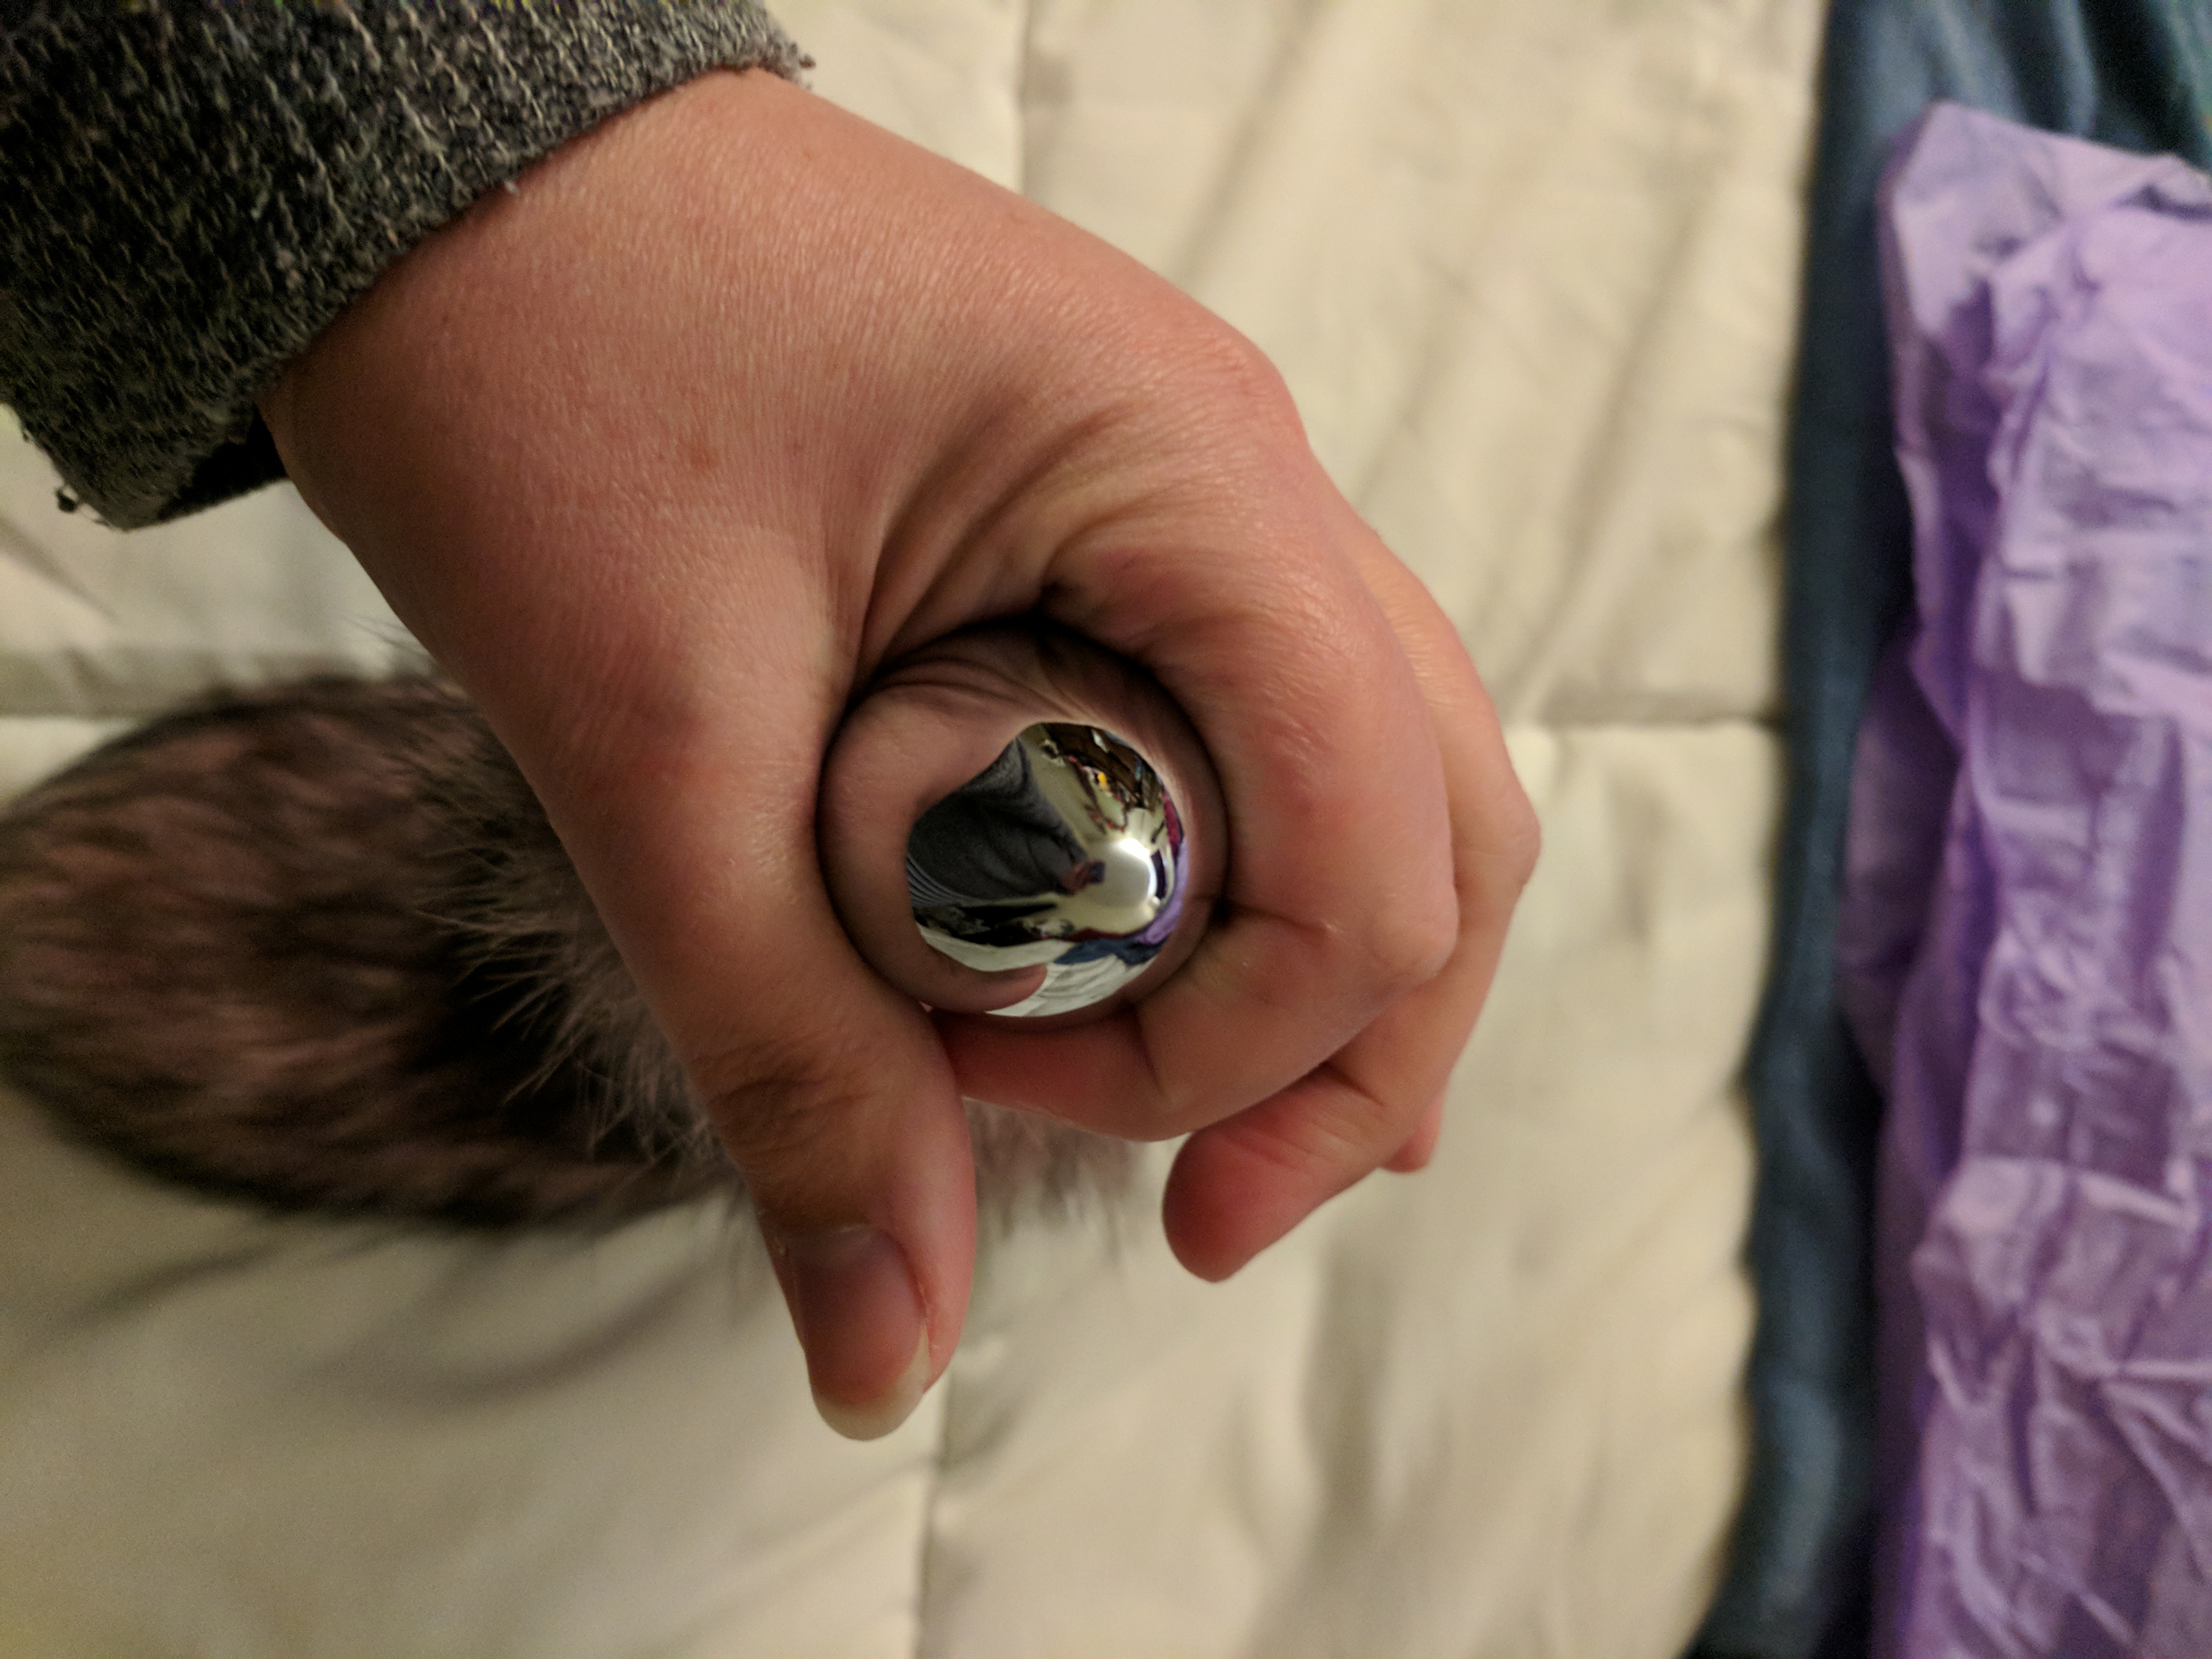 Plug in hand, with fingers wrapped around it for scale